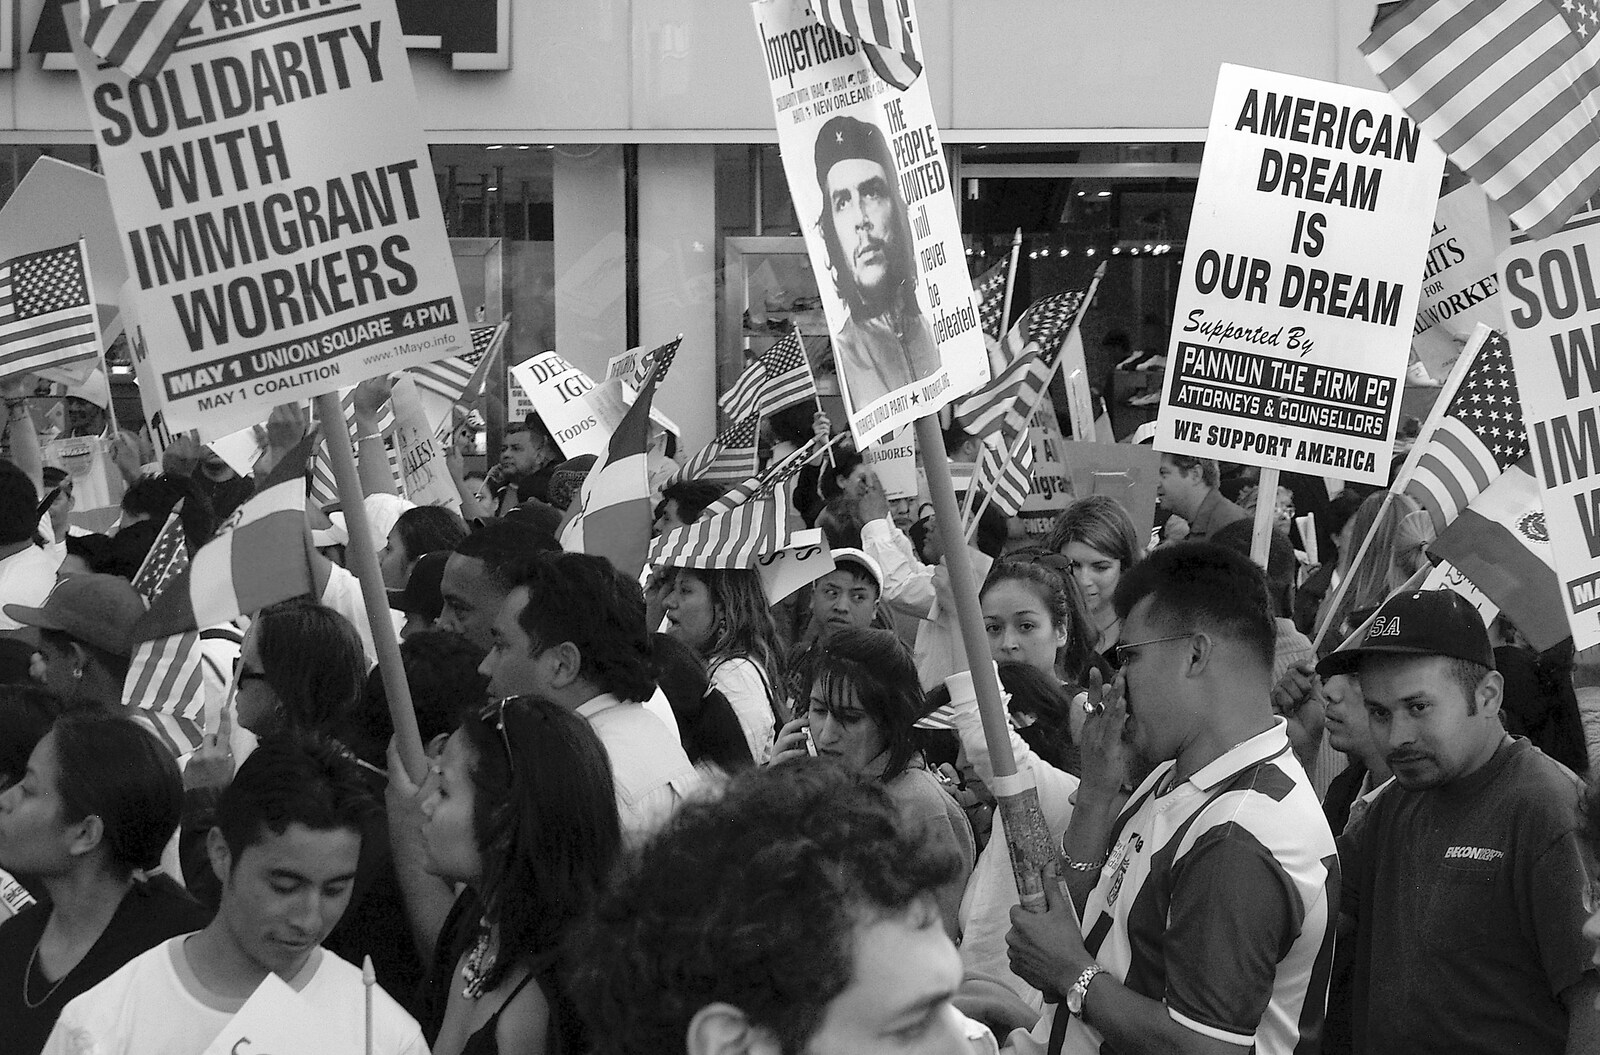 A placard of Che Guevara is waved around from A Union Square Demo, Bryant Park and Columbus Circle, New York, US - 2nd May 2006